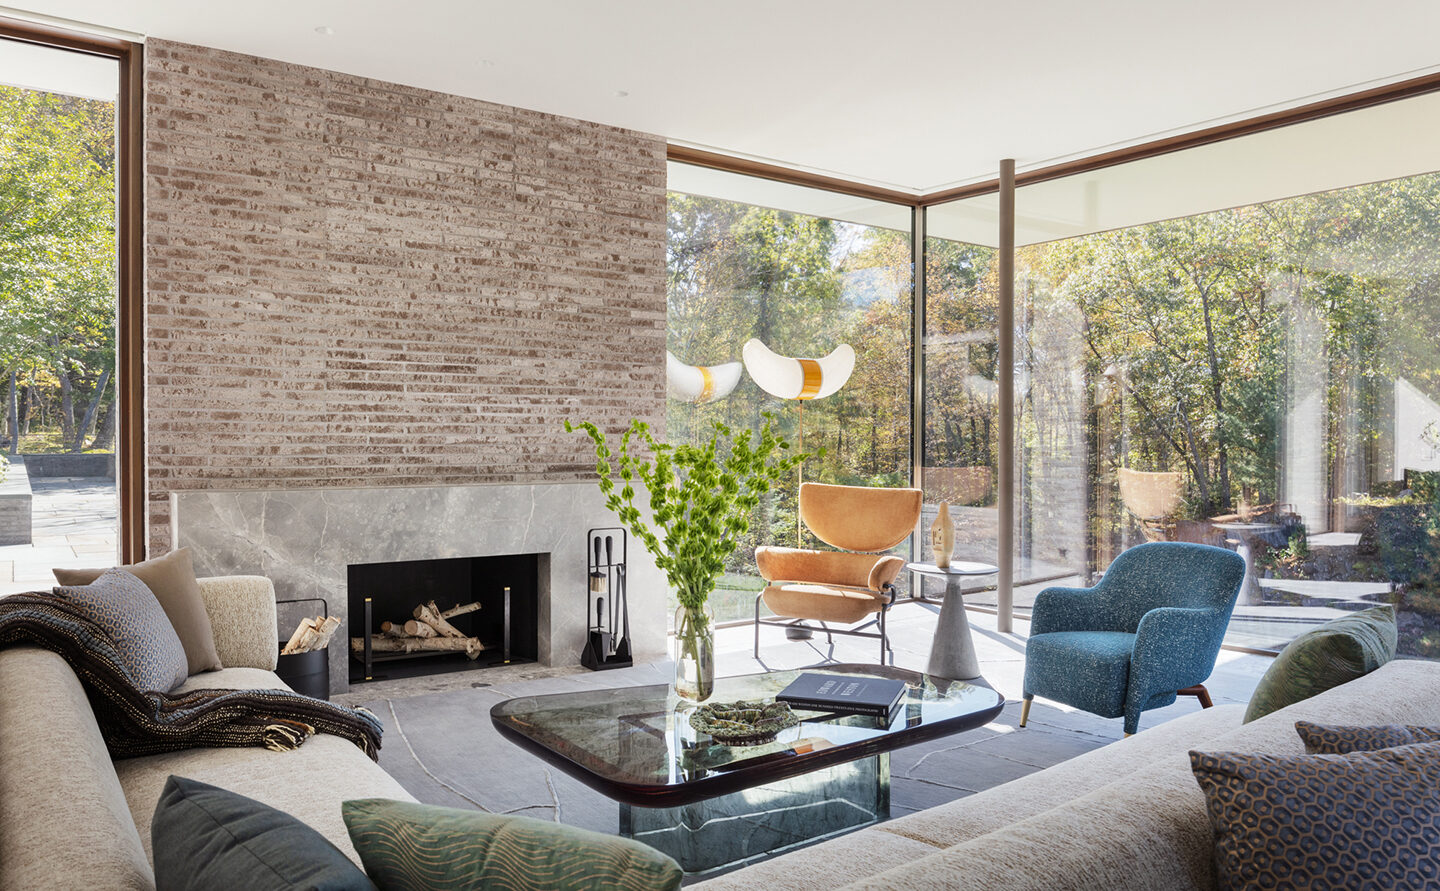 A living area interior with a striking coffee table, luxury furnishings, and a fireplace